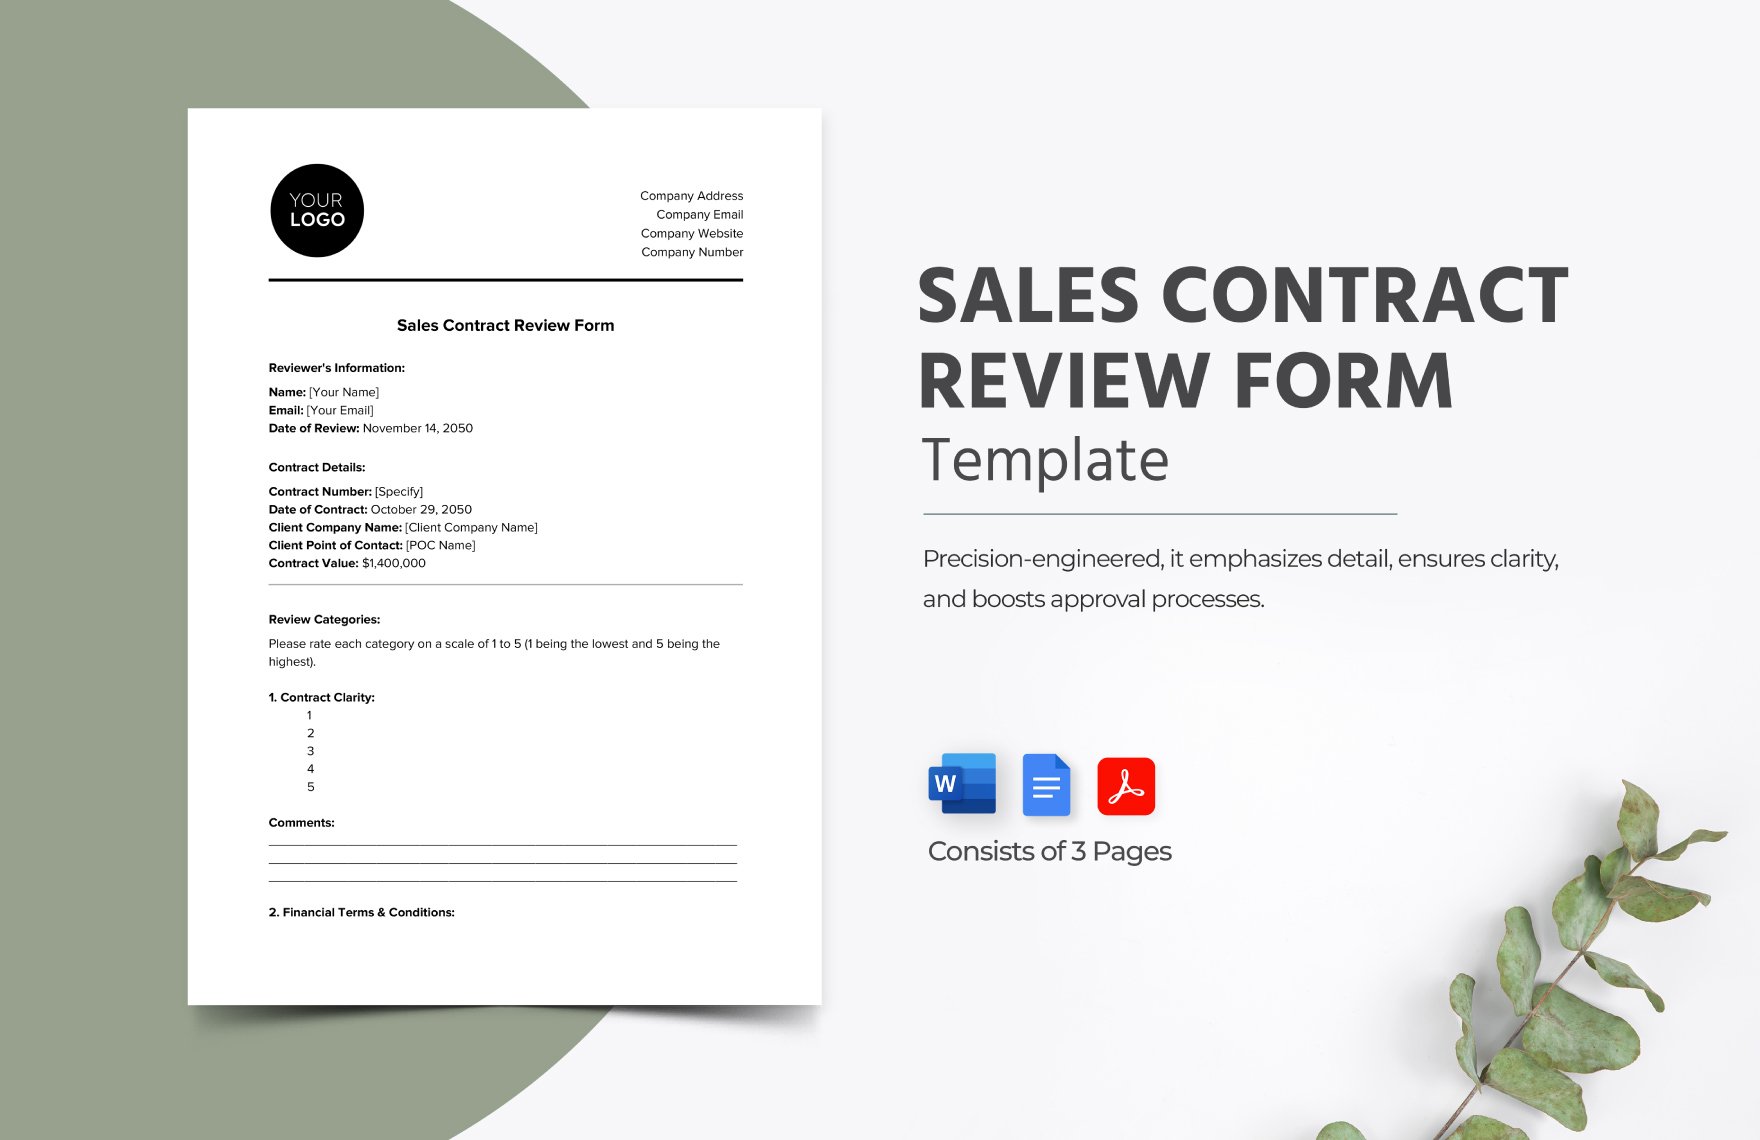 Sales Contract Review Form Template in Word, Google Docs, PDF